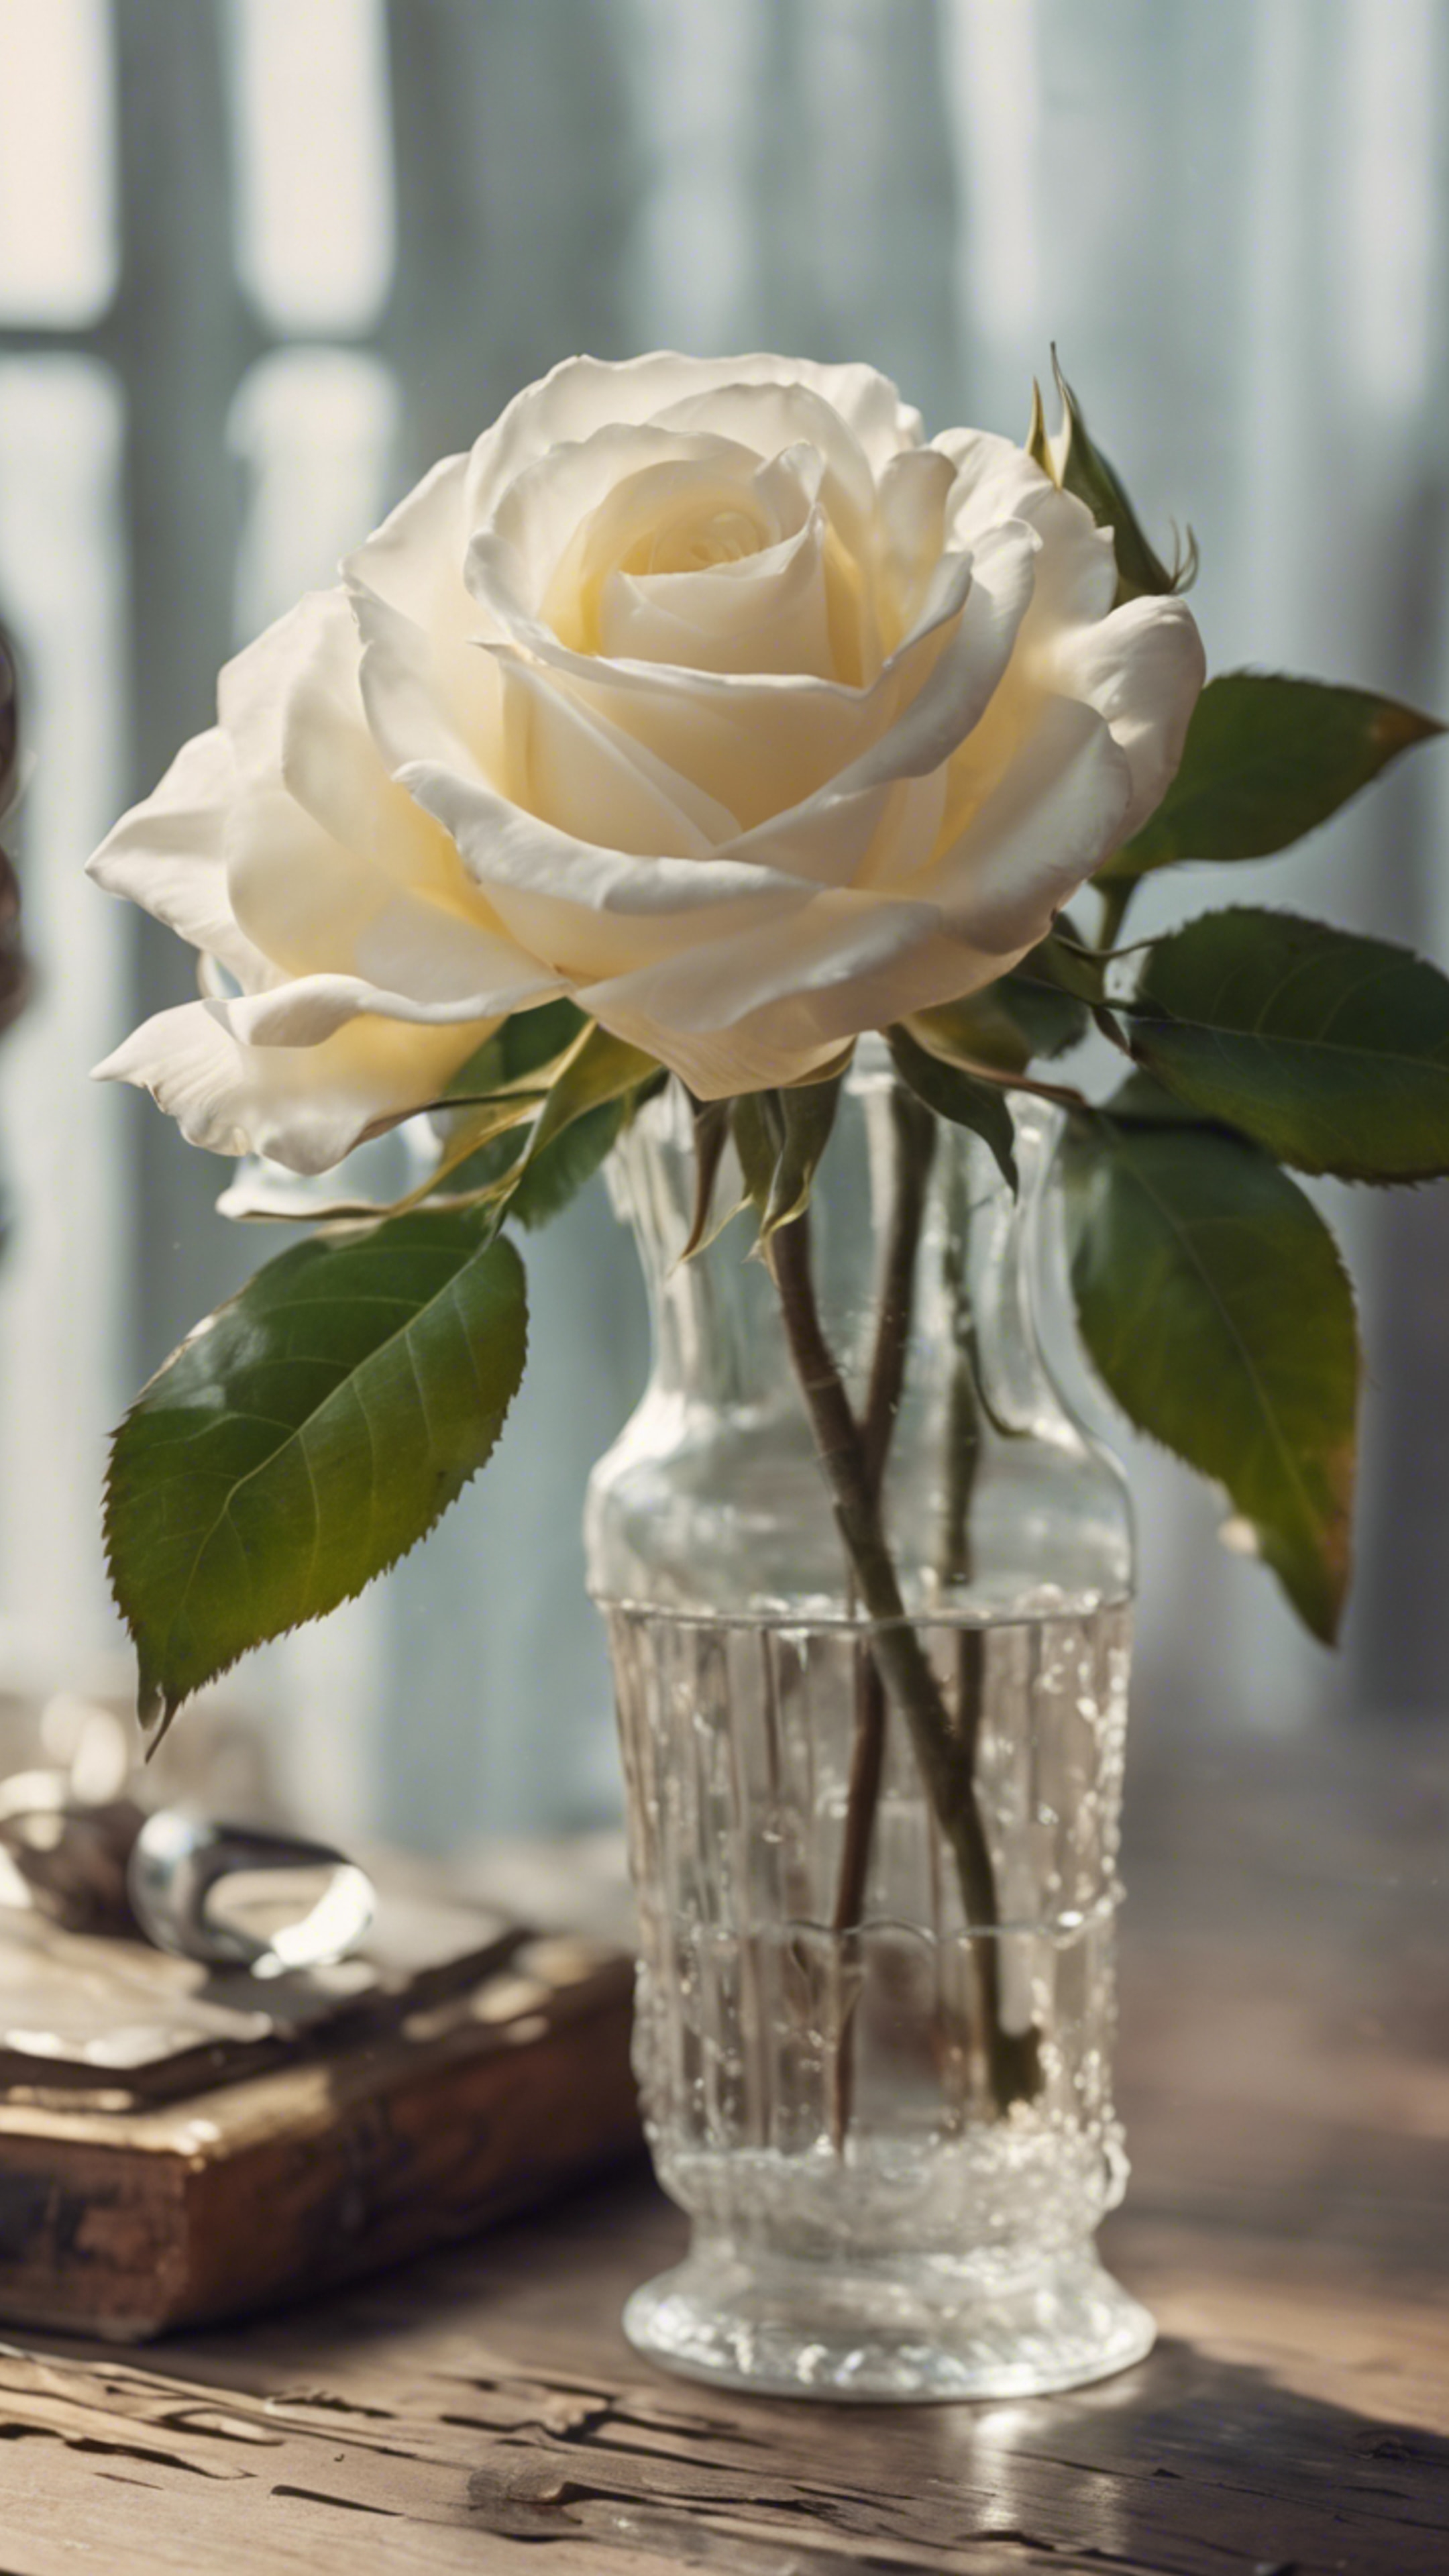 A soft white rose in a vintage glass vase on an antique wooden table. 牆紙[fc4486b9e2ee4669bbfe]